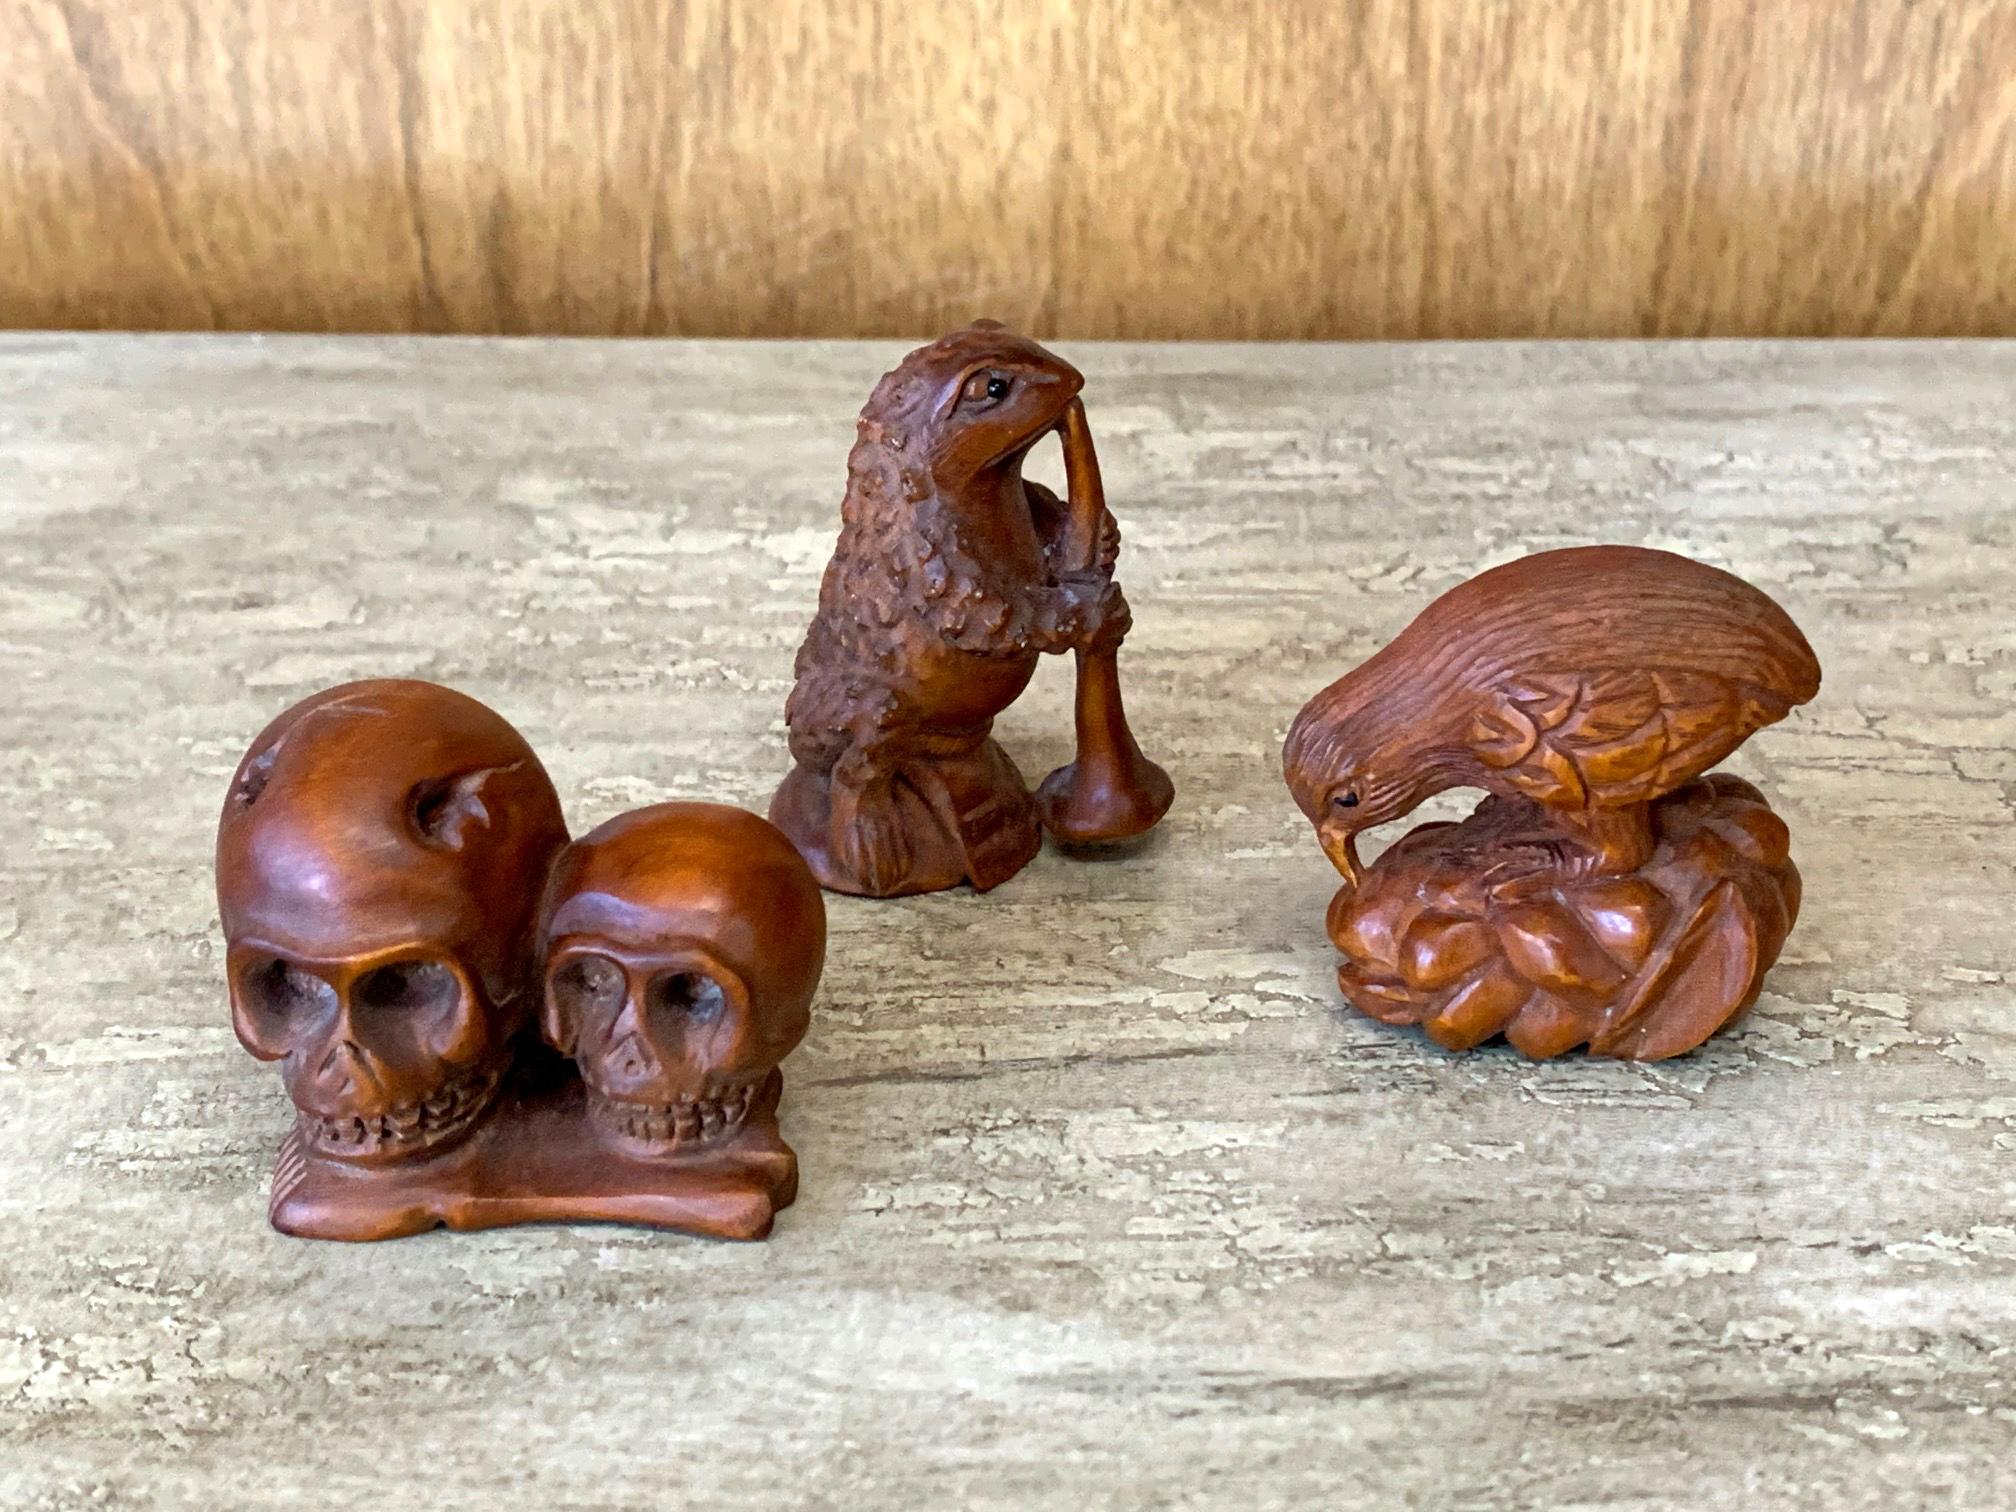 Set of three Japanese netsukes carved out of wood with a reddish stained finish, appear to be circa mid-20th century. One depicts a frog holding a trumpet; one a rooster eating grains, one two skulls with base made of bone. None signed. Sold as a